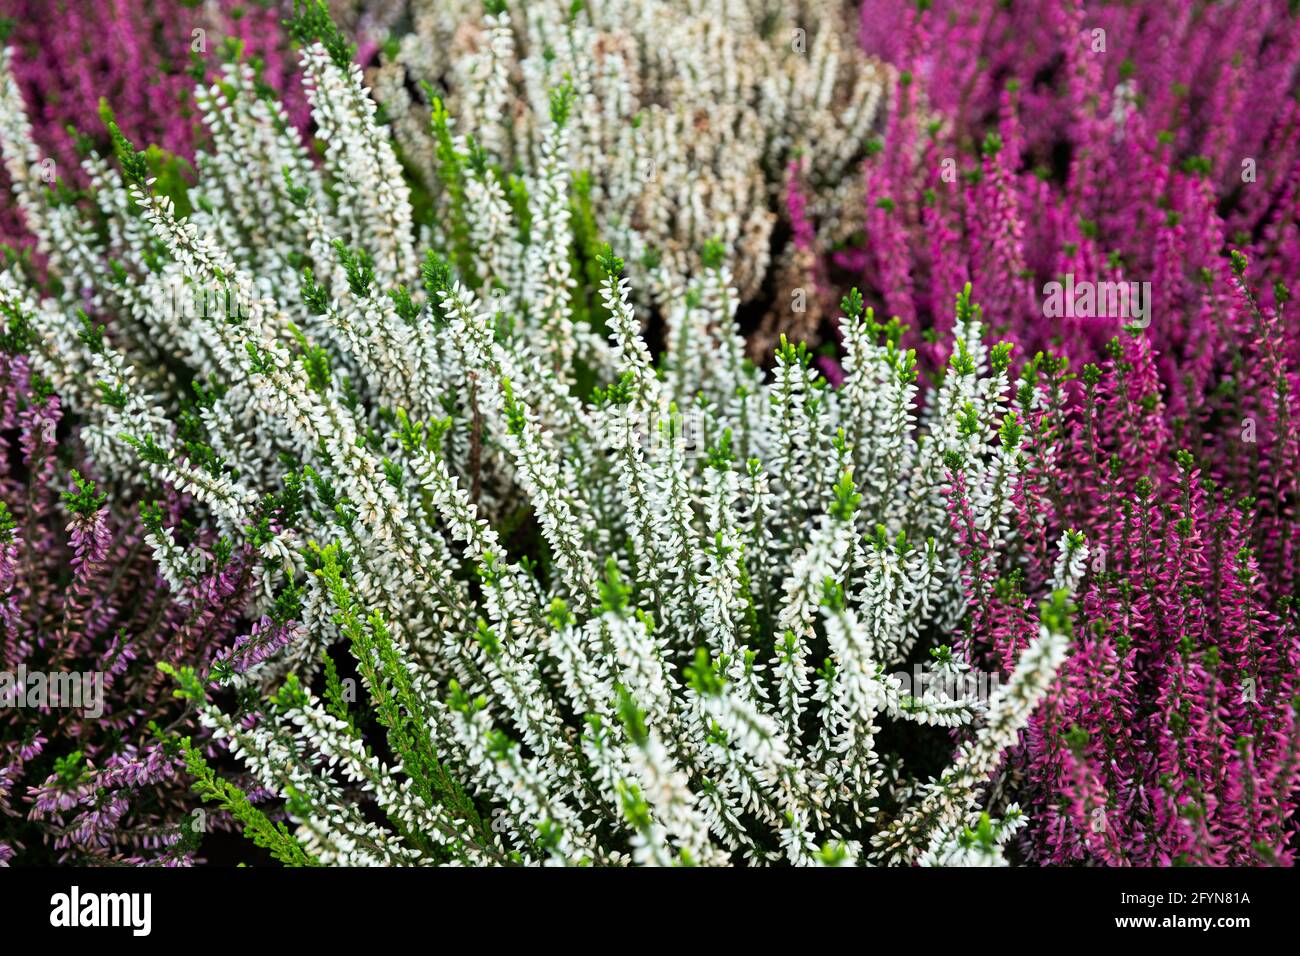 Richly blooming heather with white and mauve flowers grown in pots in greenhouse Stock Photo